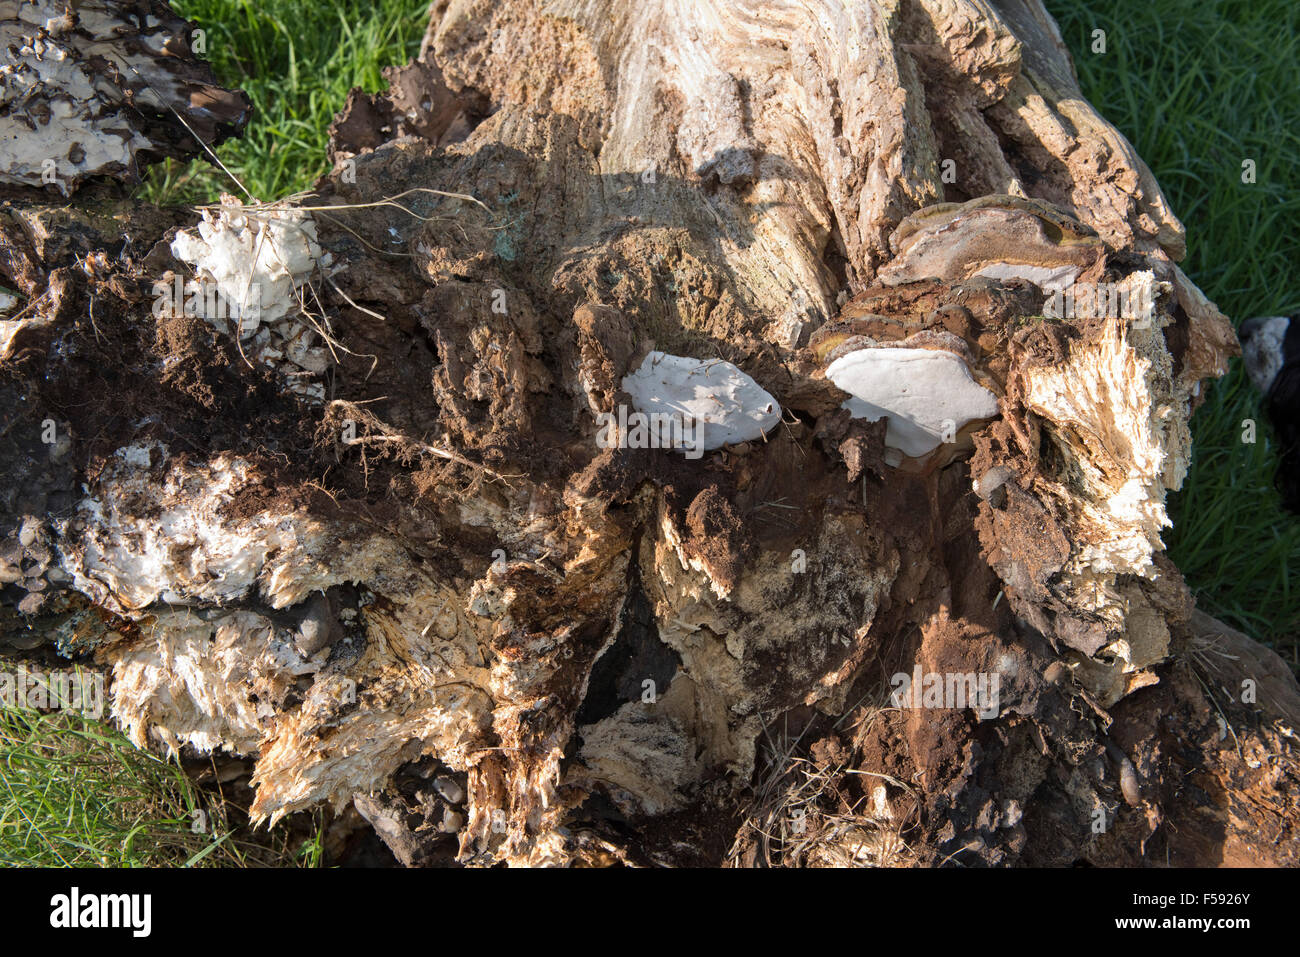 Fallen oak tree rotting and killed by several fungal pathogens with fruit bodies formed at its base, September Stock Photo